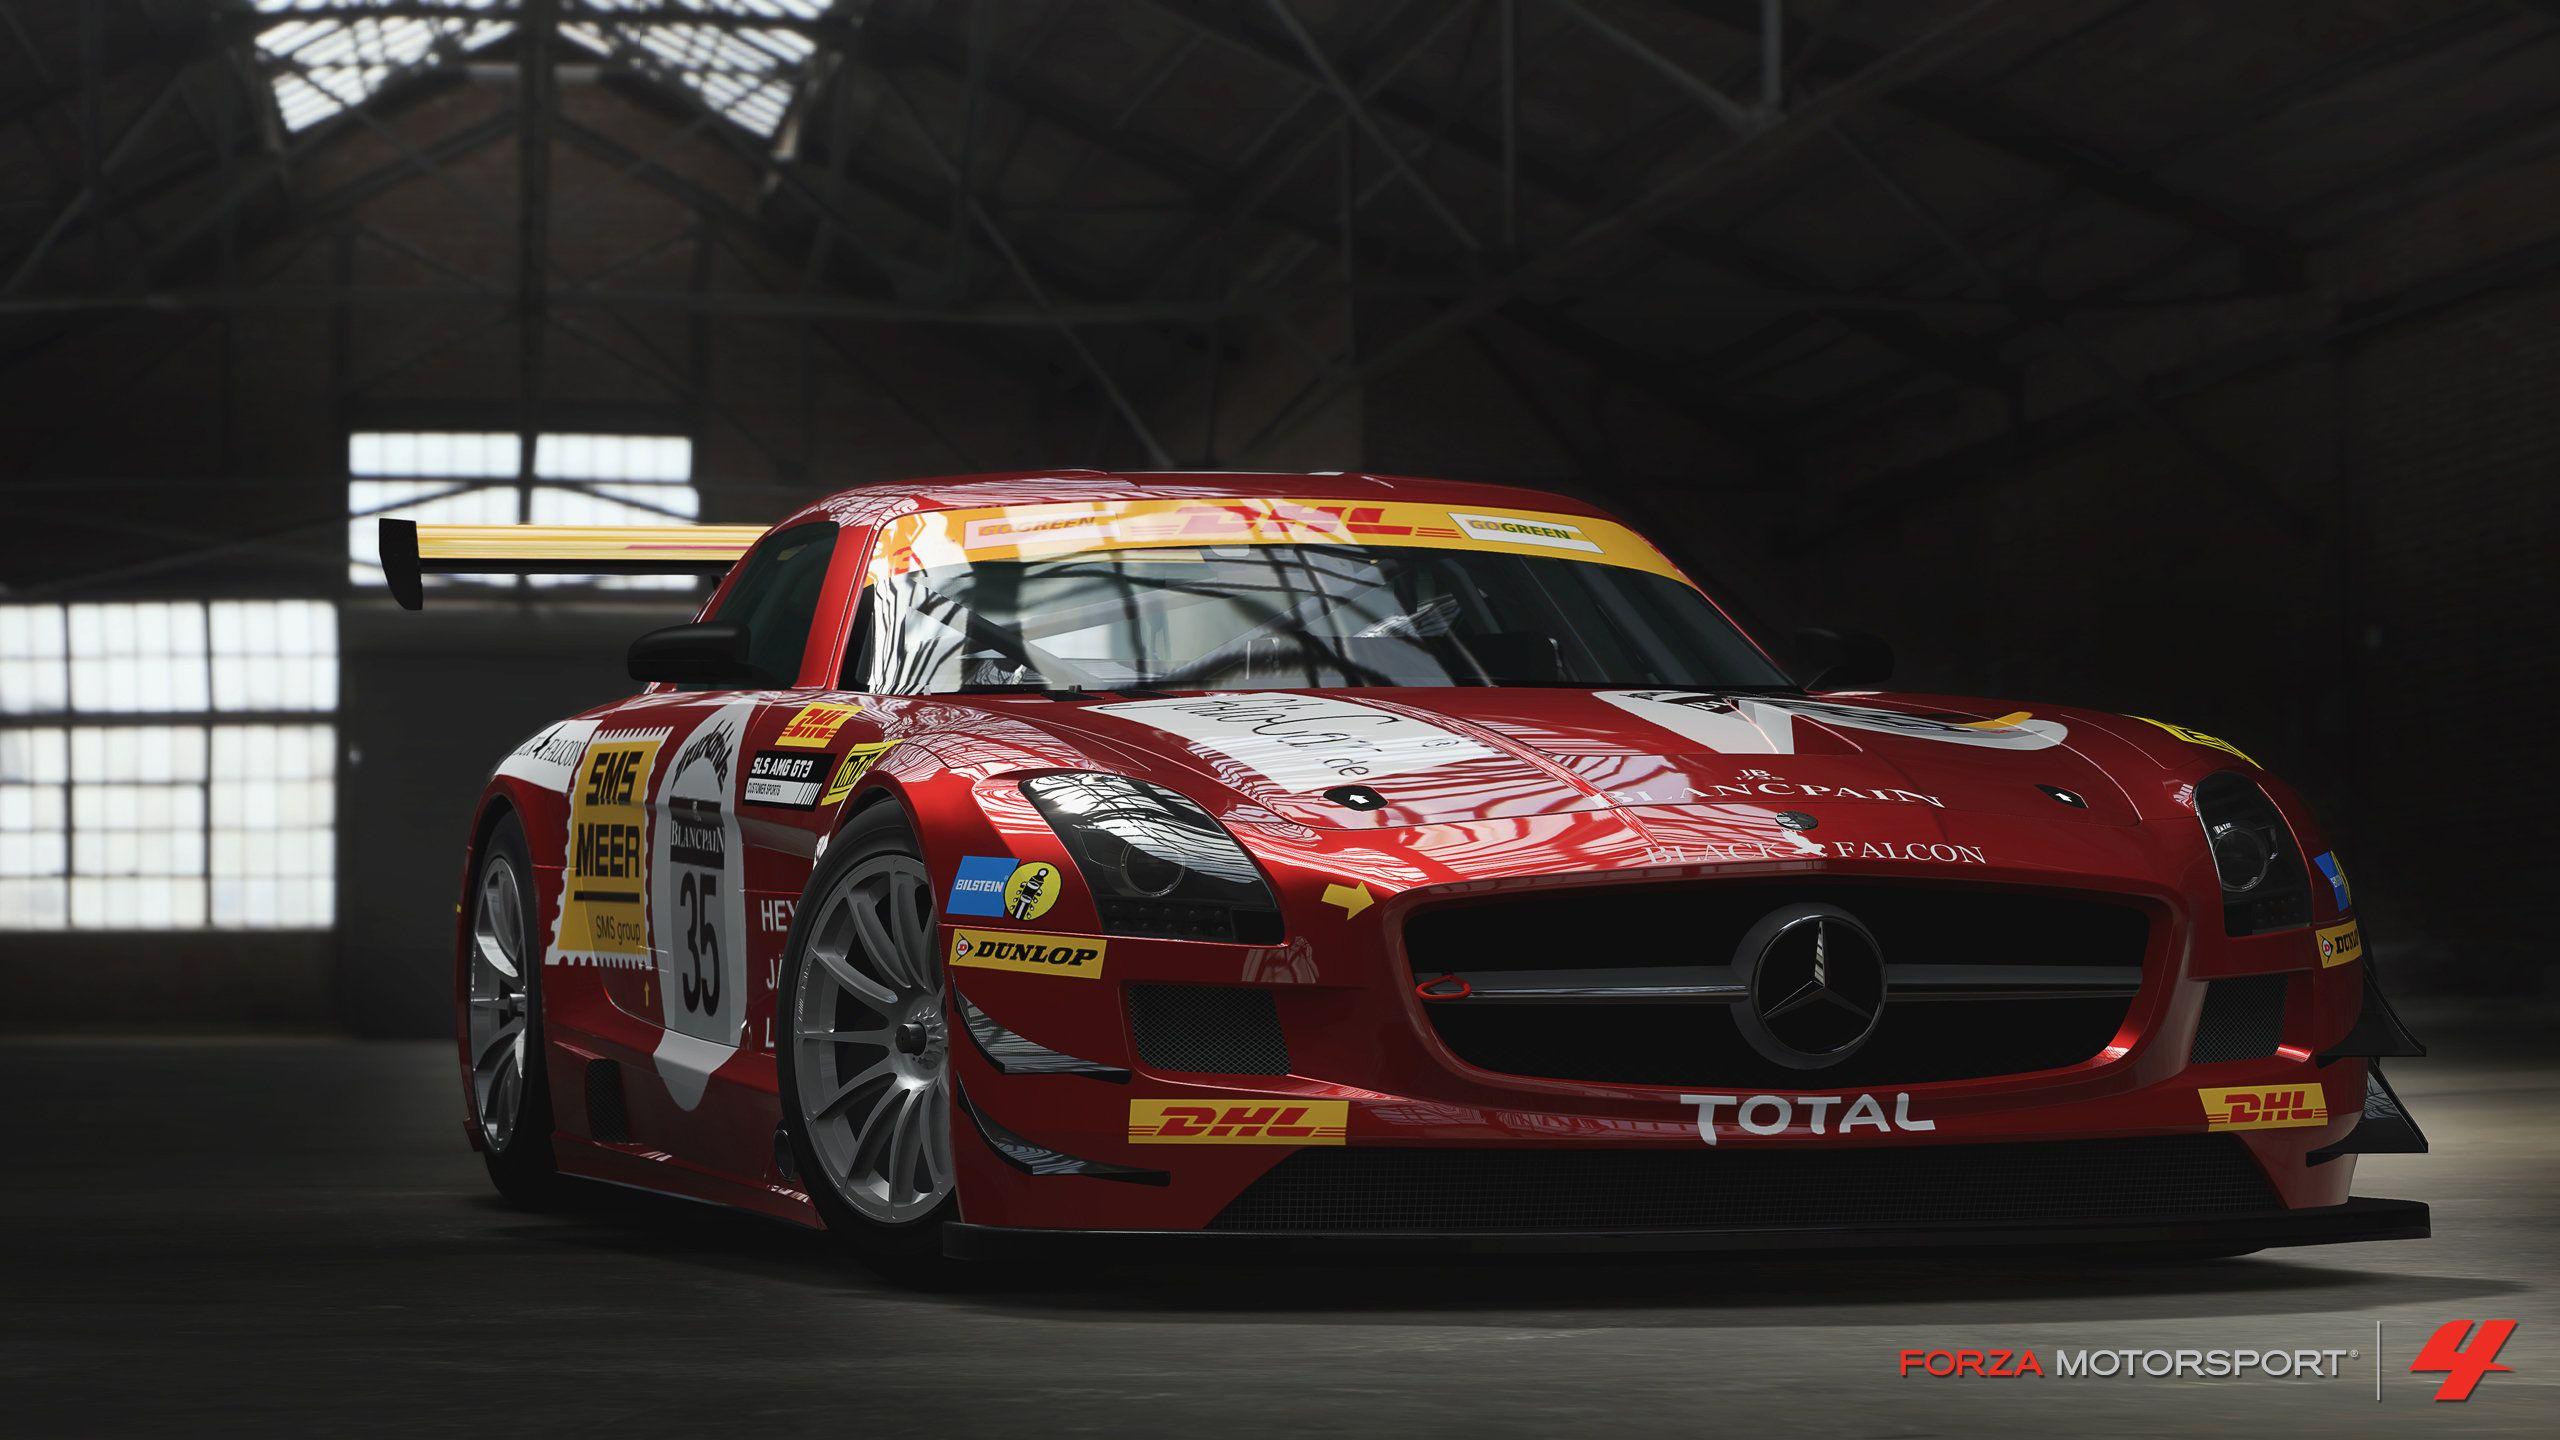 Forza Motorsport 4 HD Wallpaper and Background Image